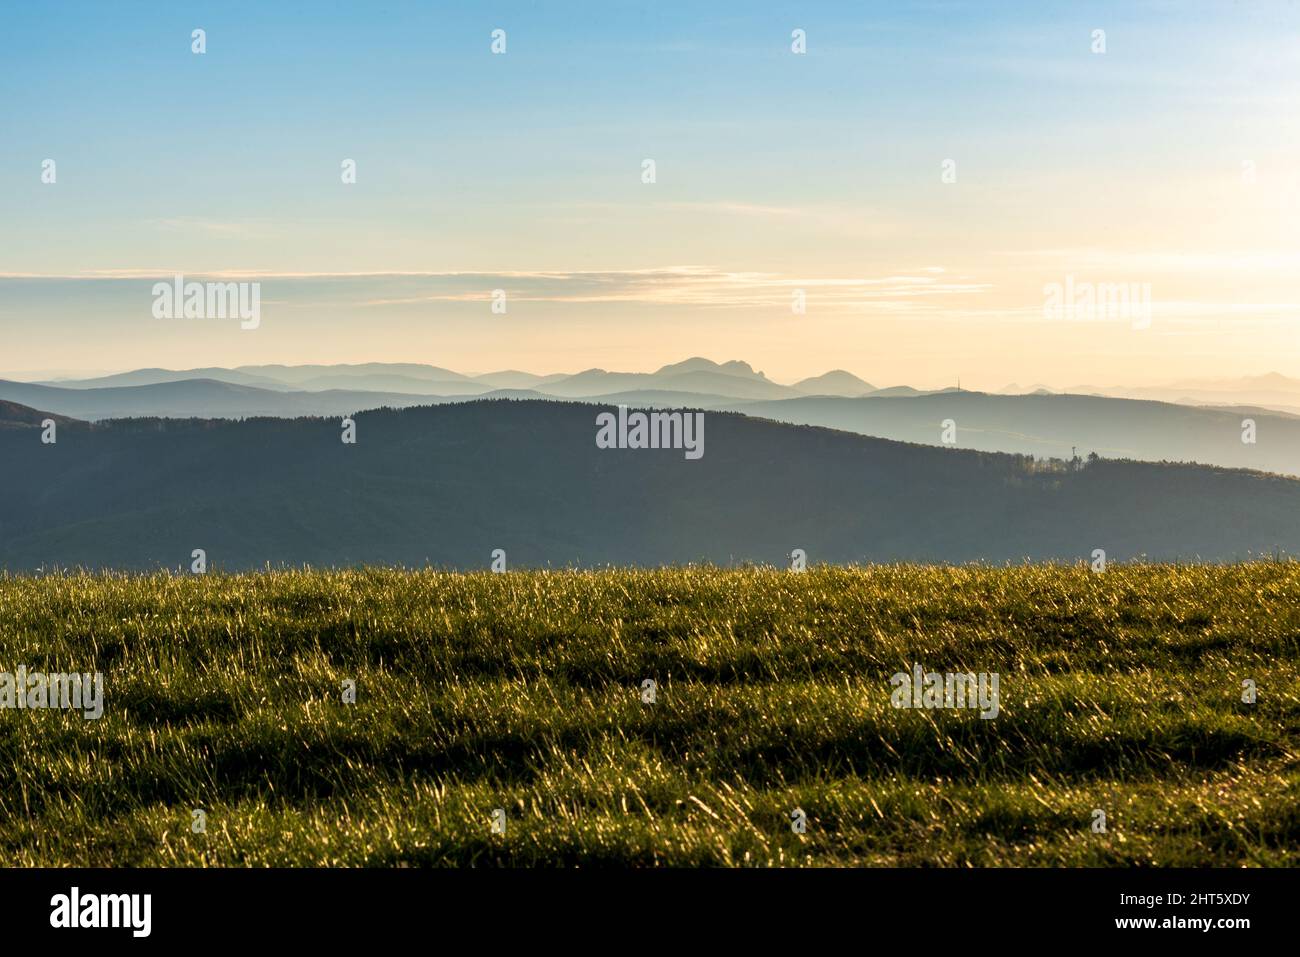 Morning view from Machnac hill summit in Biele Karpaty mountains in Slovakia near borders with Czech republic Stock Photo